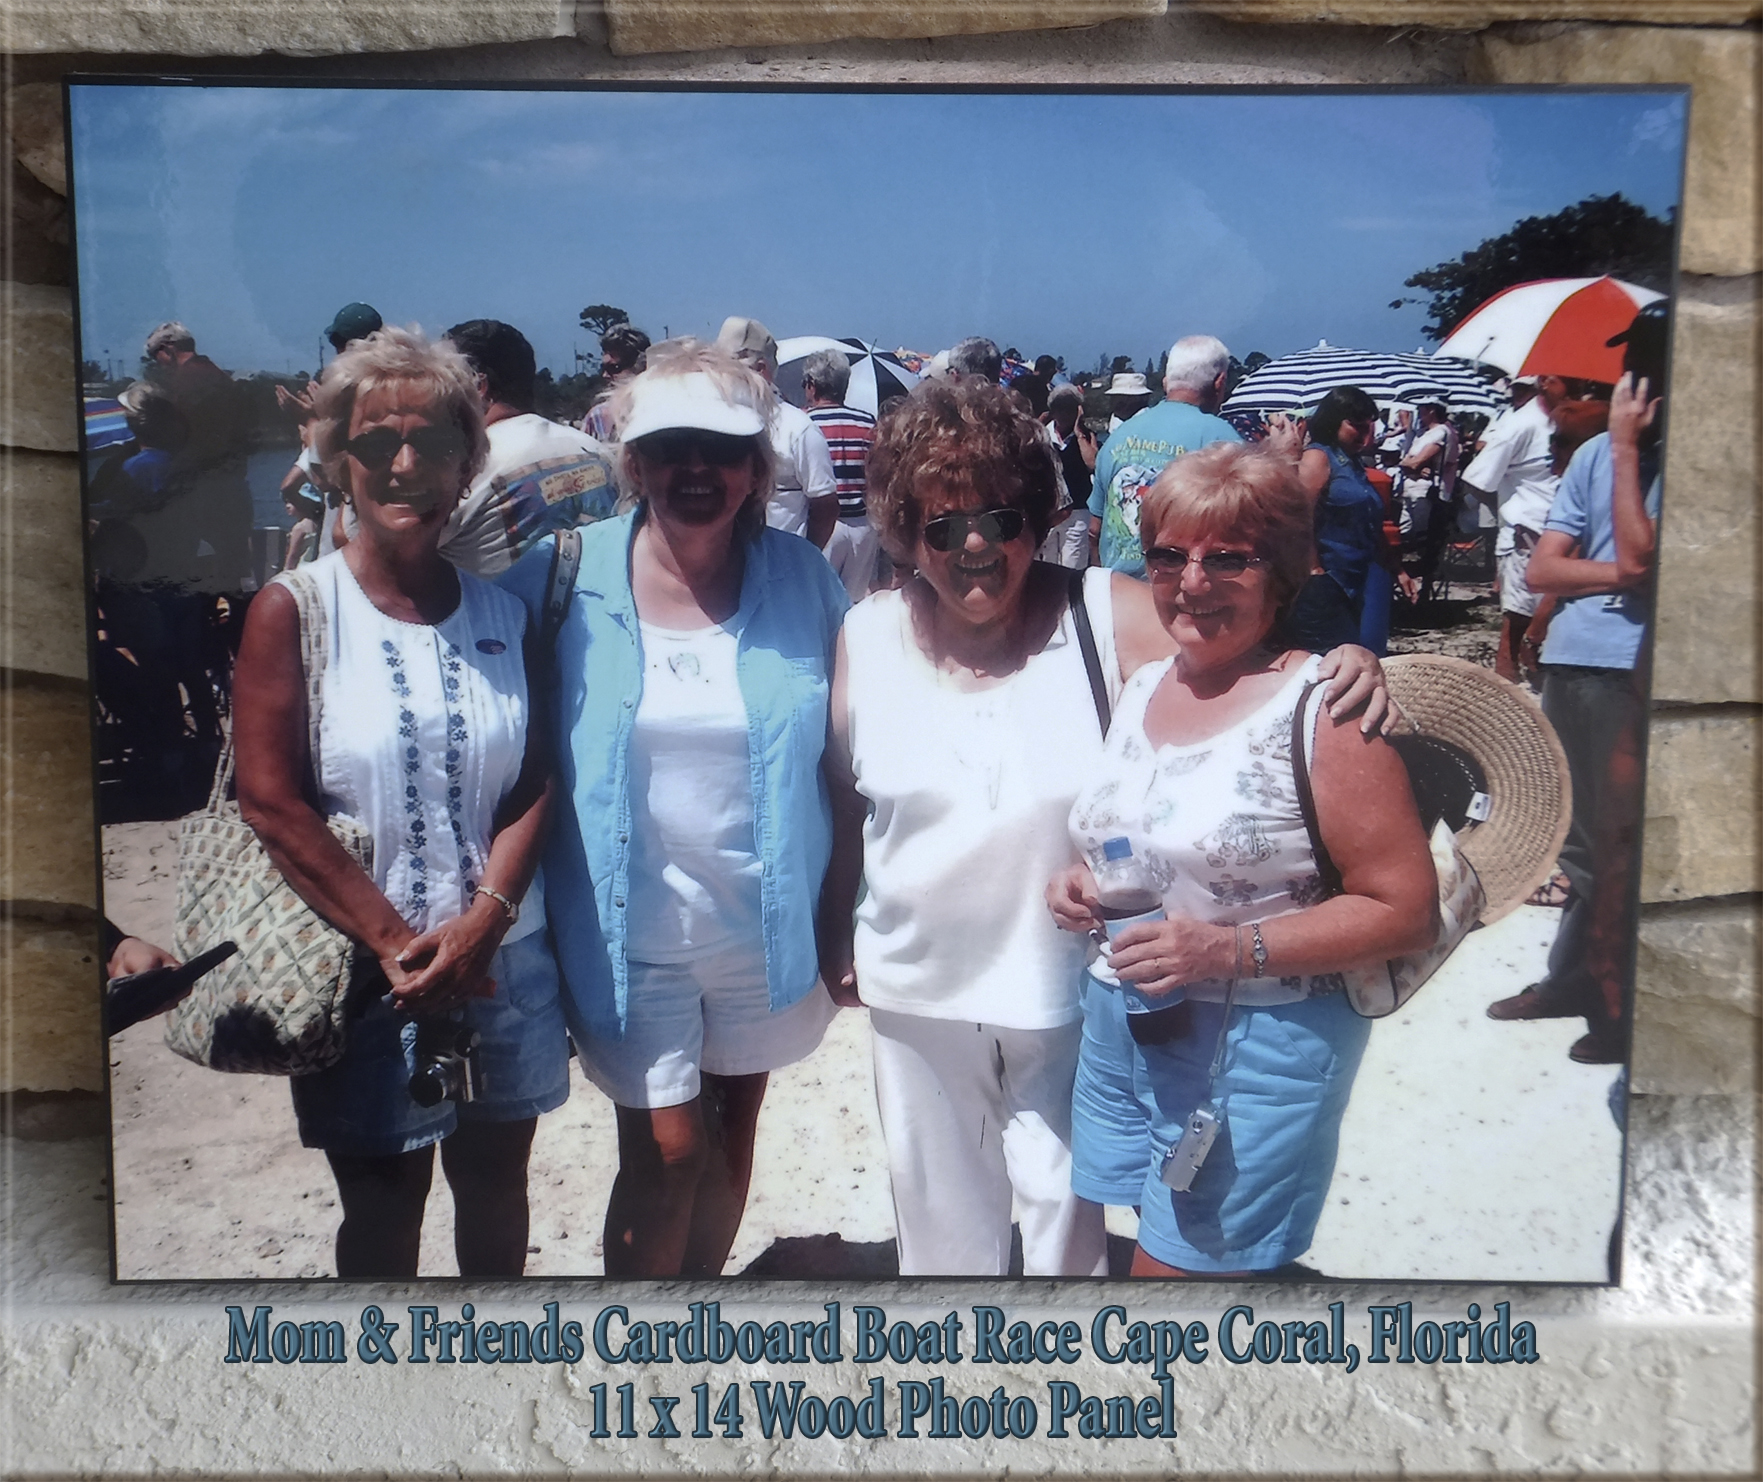 My Mom & Friends made with sublimation printing